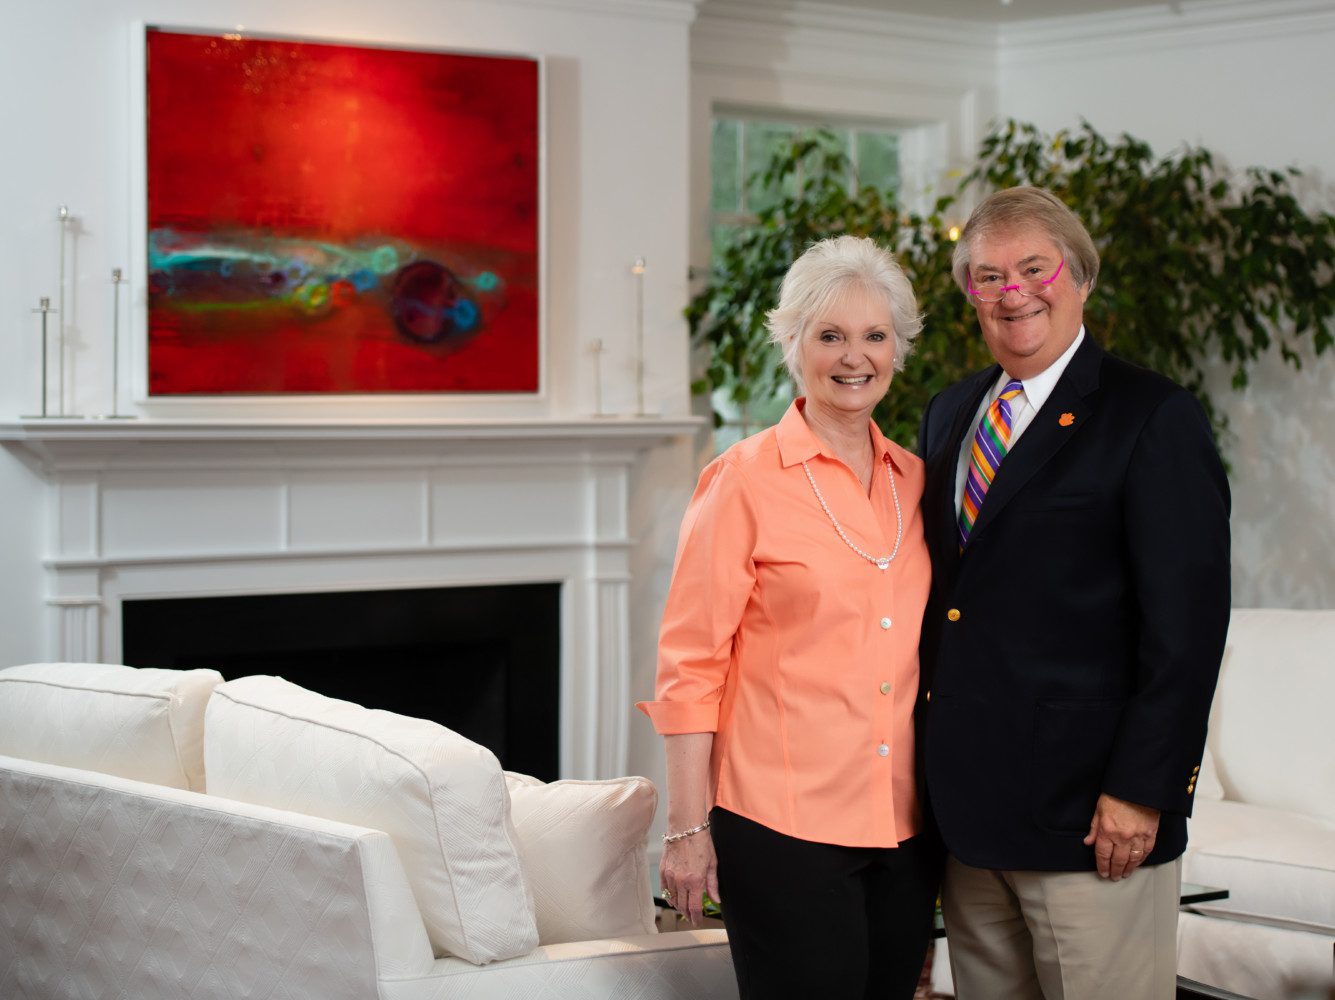 Image of Ben and Becca at home in Greenville. Becca in an orange shirt, Ben in a suit, standing in front of fireplace with large art piece on the wall.